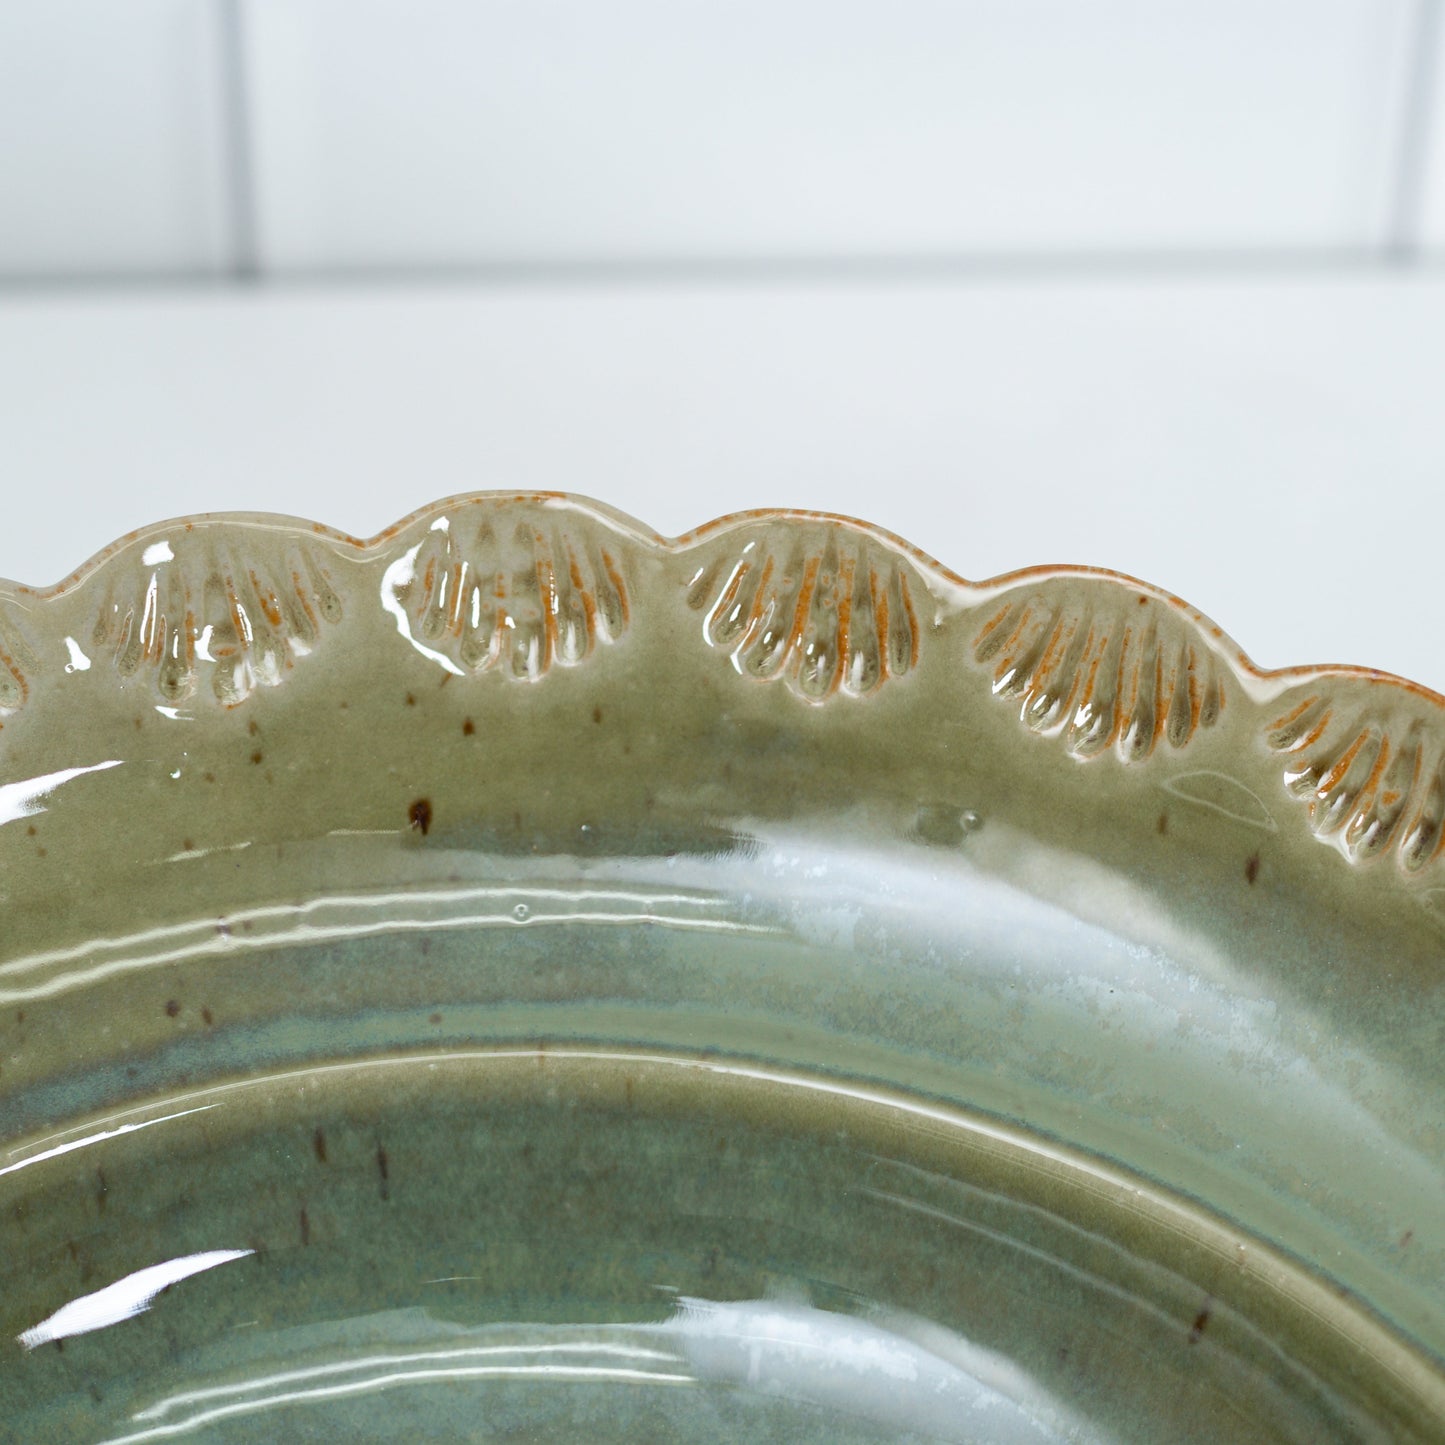 Serving Bowl with Scalloped Edge